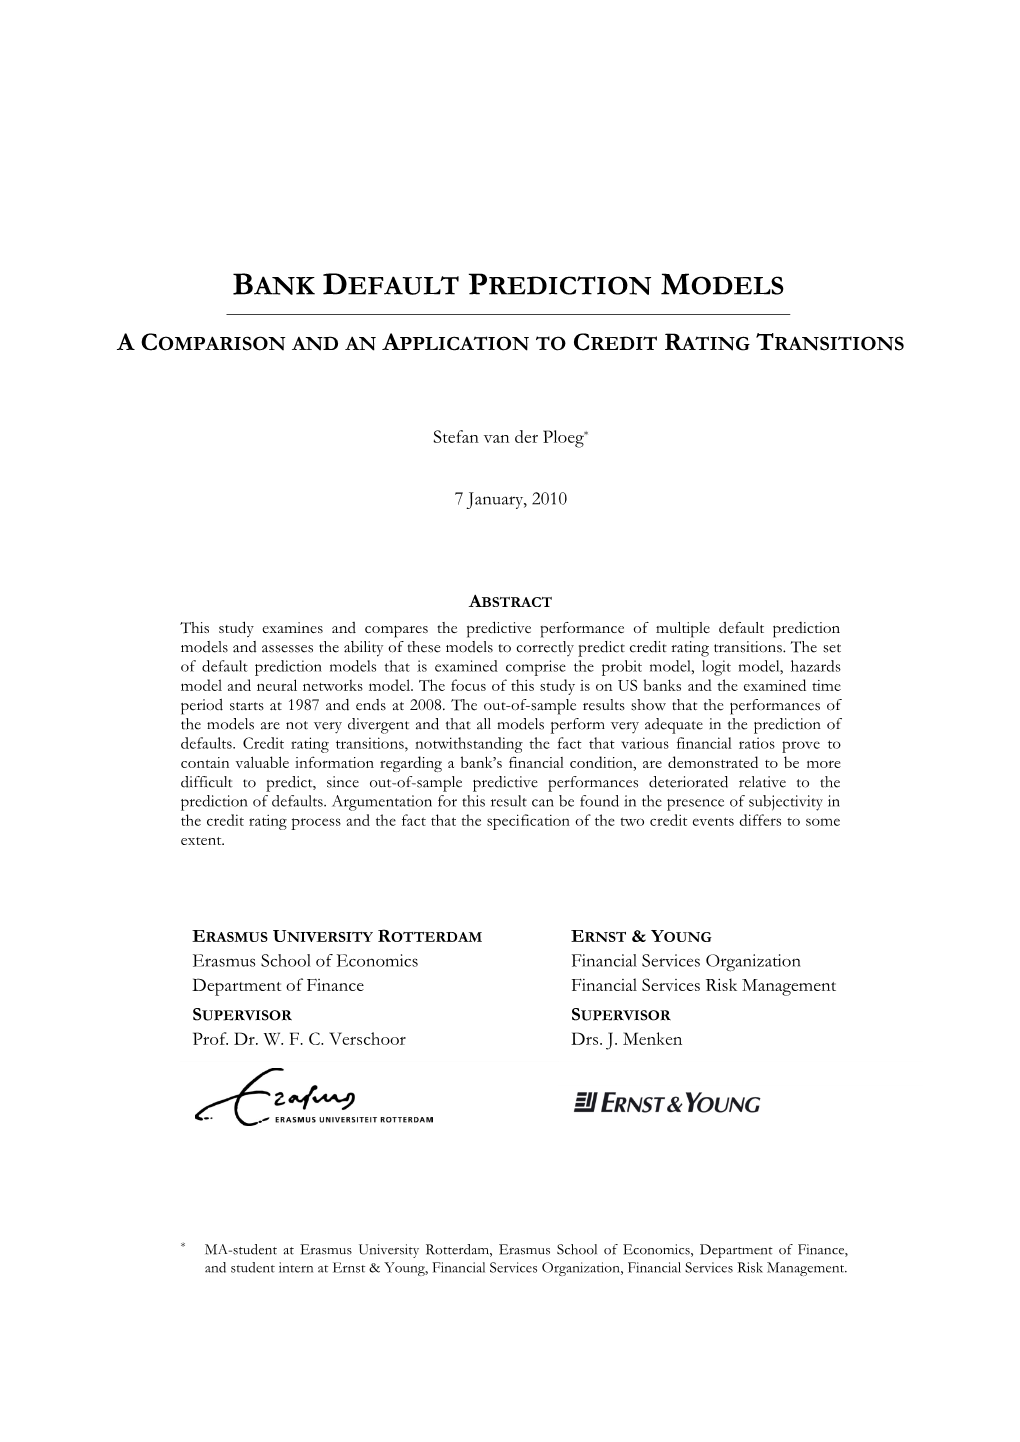 Bank Default Prediction Models: a Comparison and an Application to Credit Rating Transitions